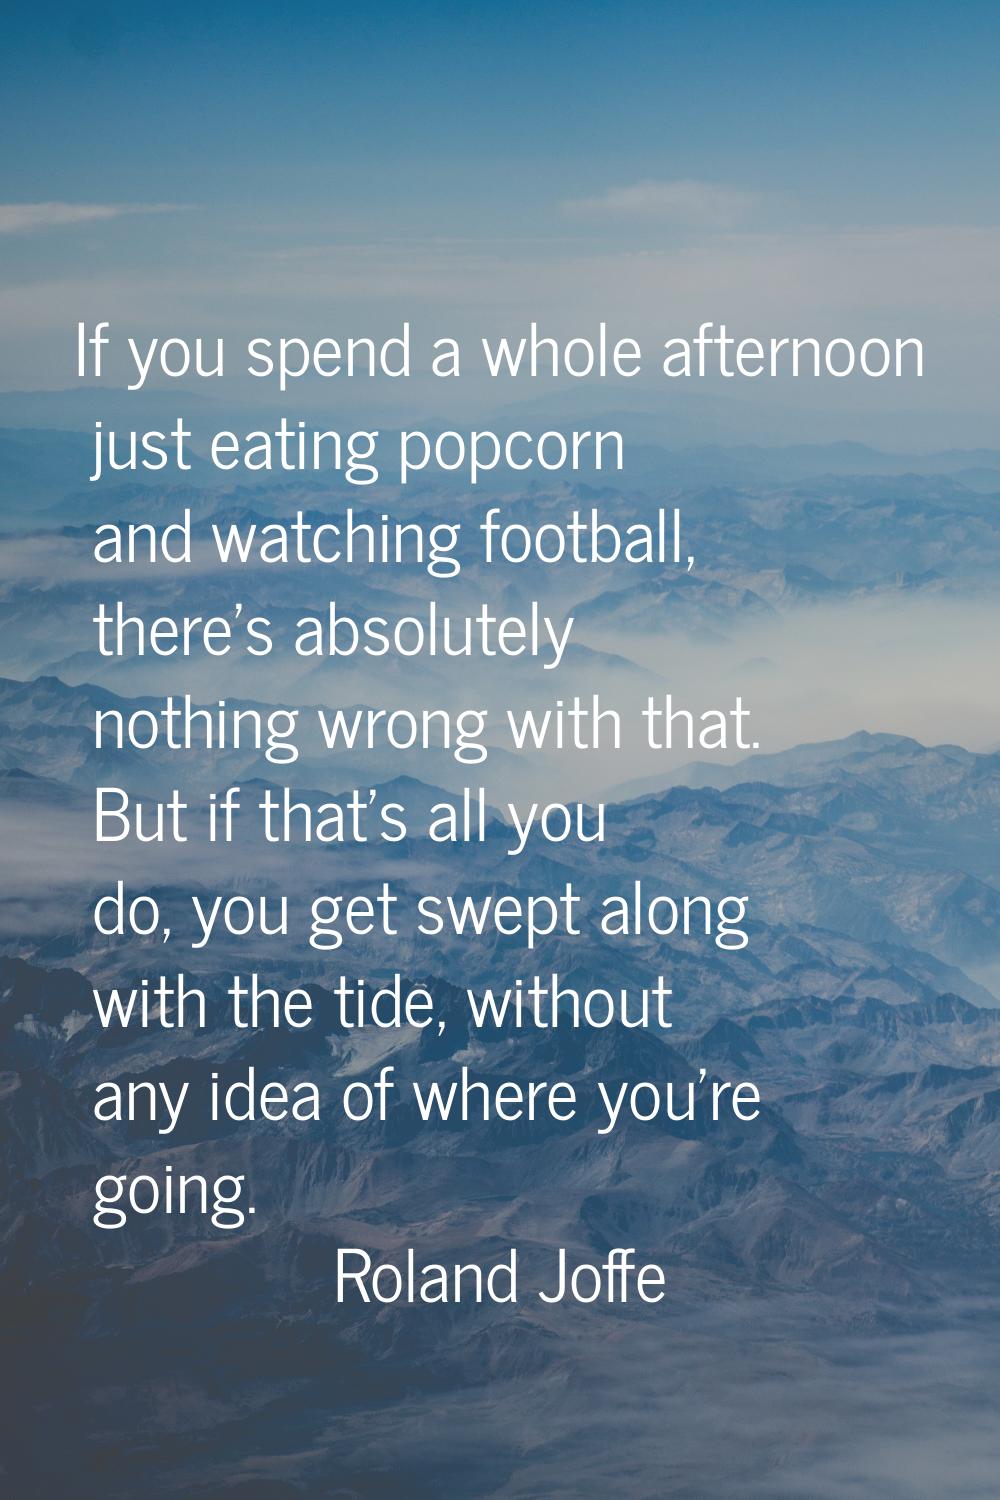 If you spend a whole afternoon just eating popcorn and watching football, there's absolutely nothin